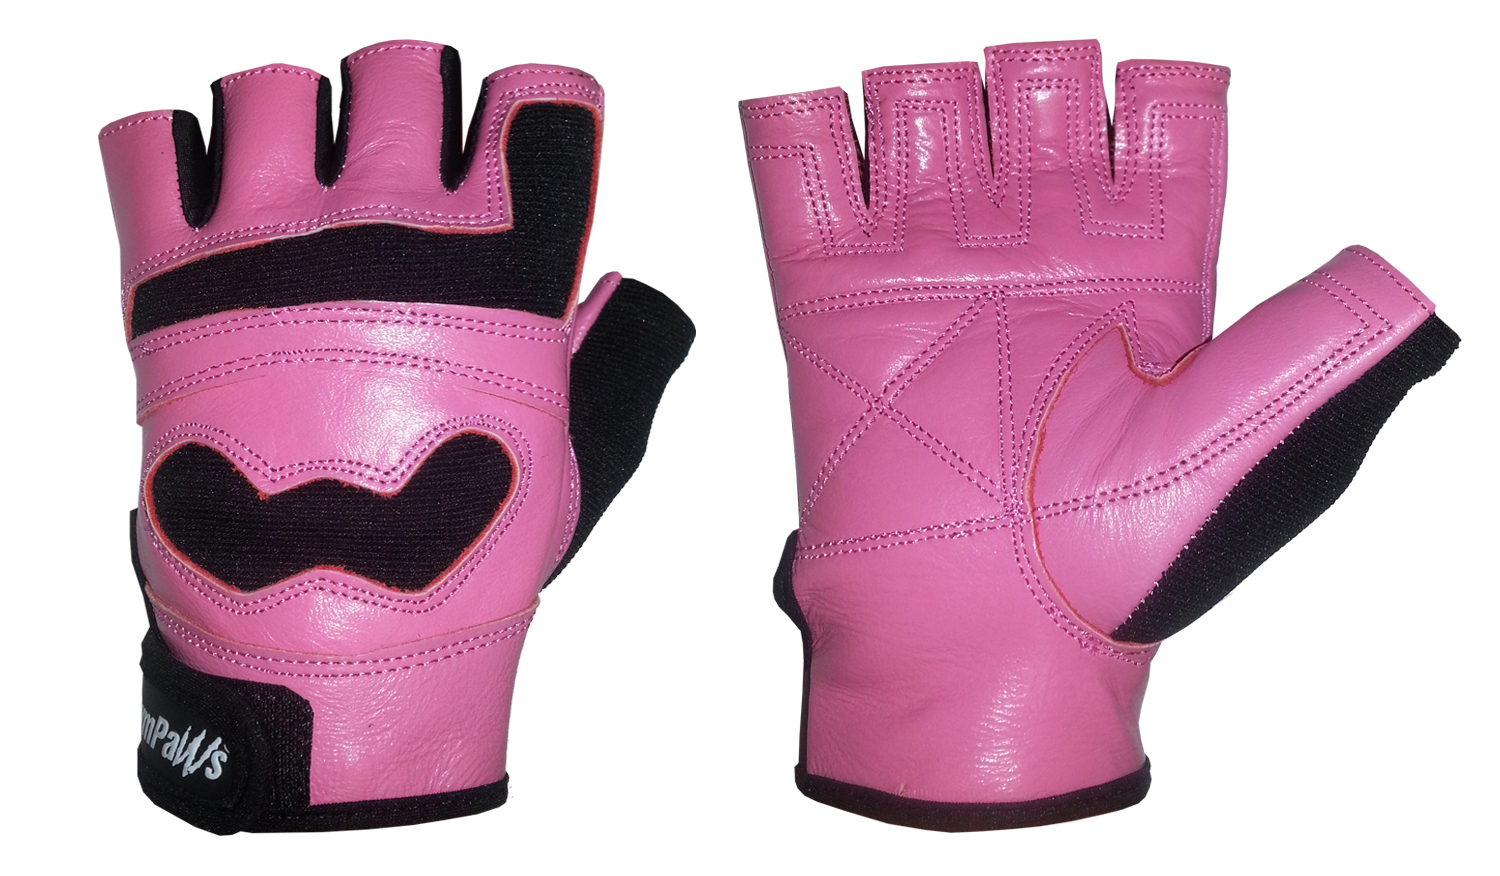 Swolemate-Workout-Gloves-Pink-Complete